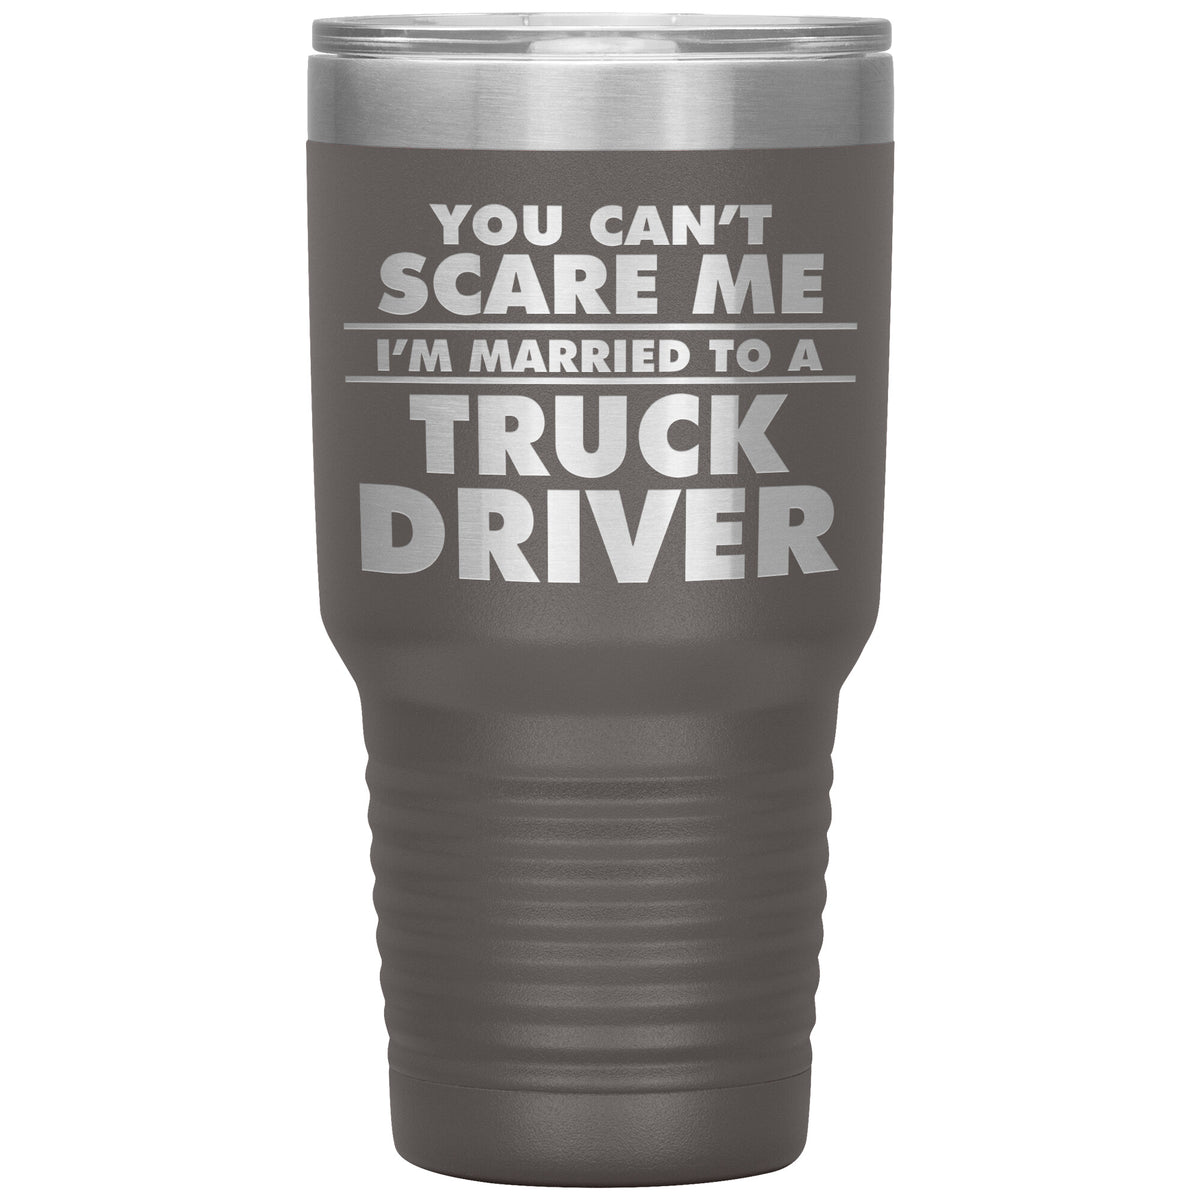 You Can't Scare Me - I'm Married to a Truck Driver - 30oz Tumbler - Free Shipping